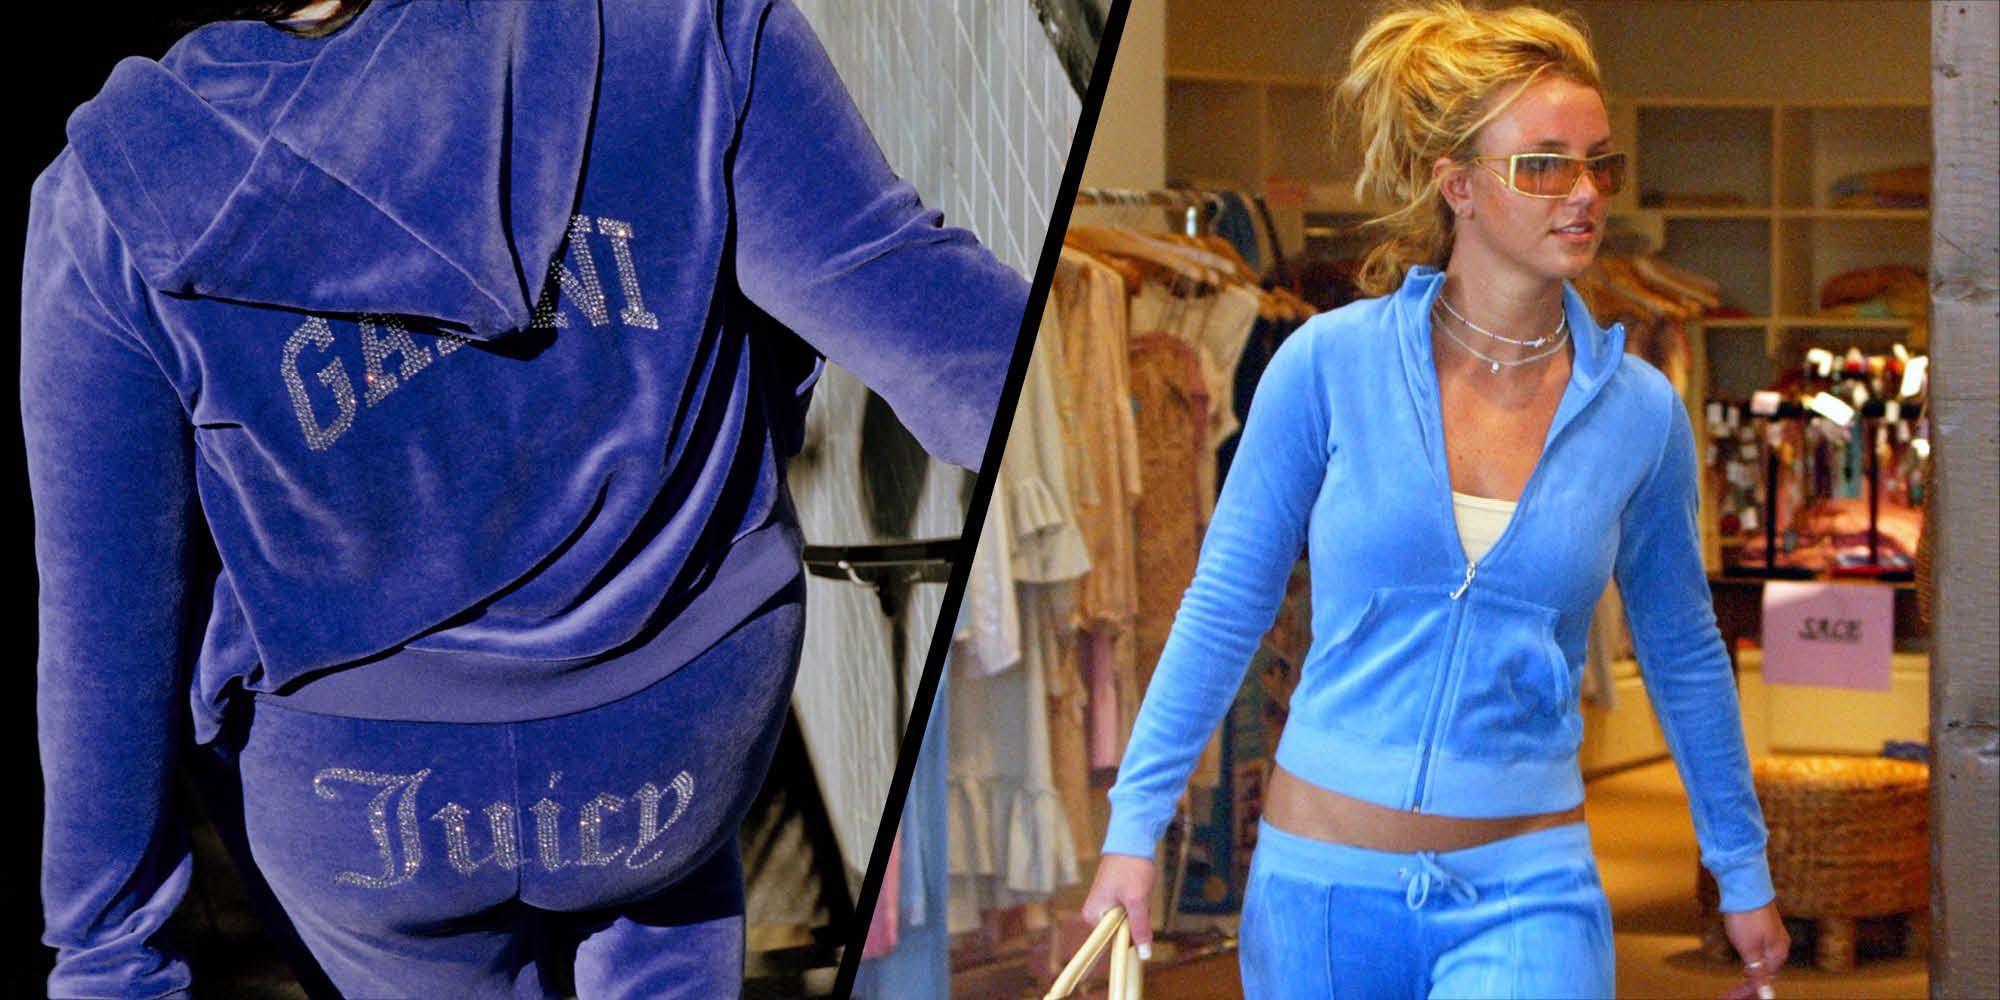 Juicy Couture Velour Tracksuits Are Making A Comeback